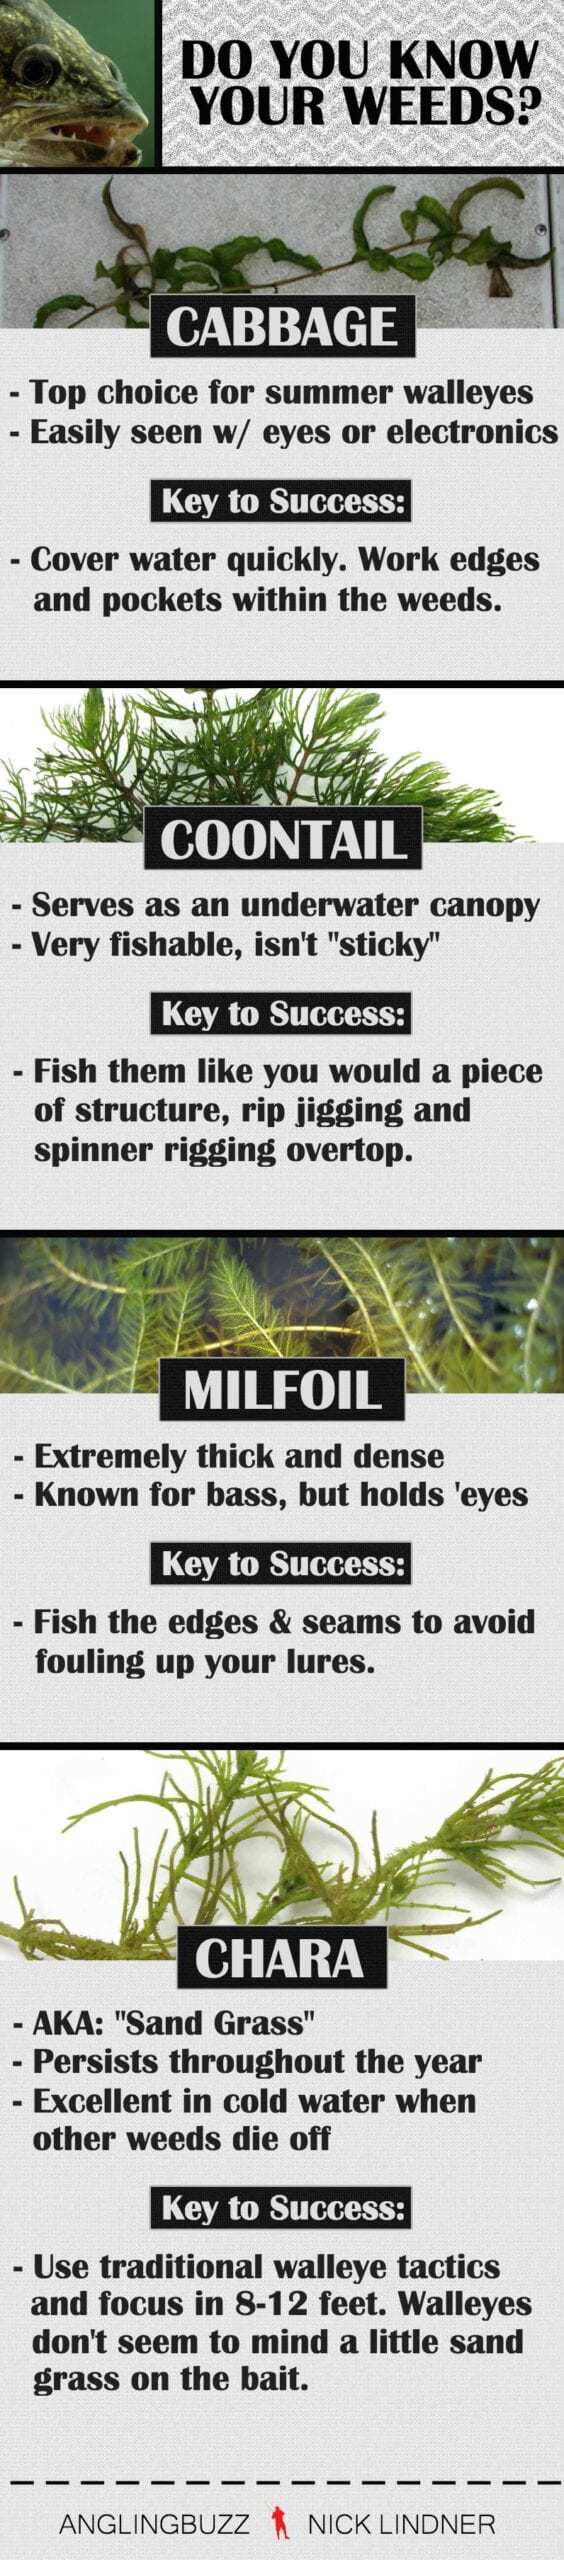 Weed Walleyes: Everything You Wanted To Know